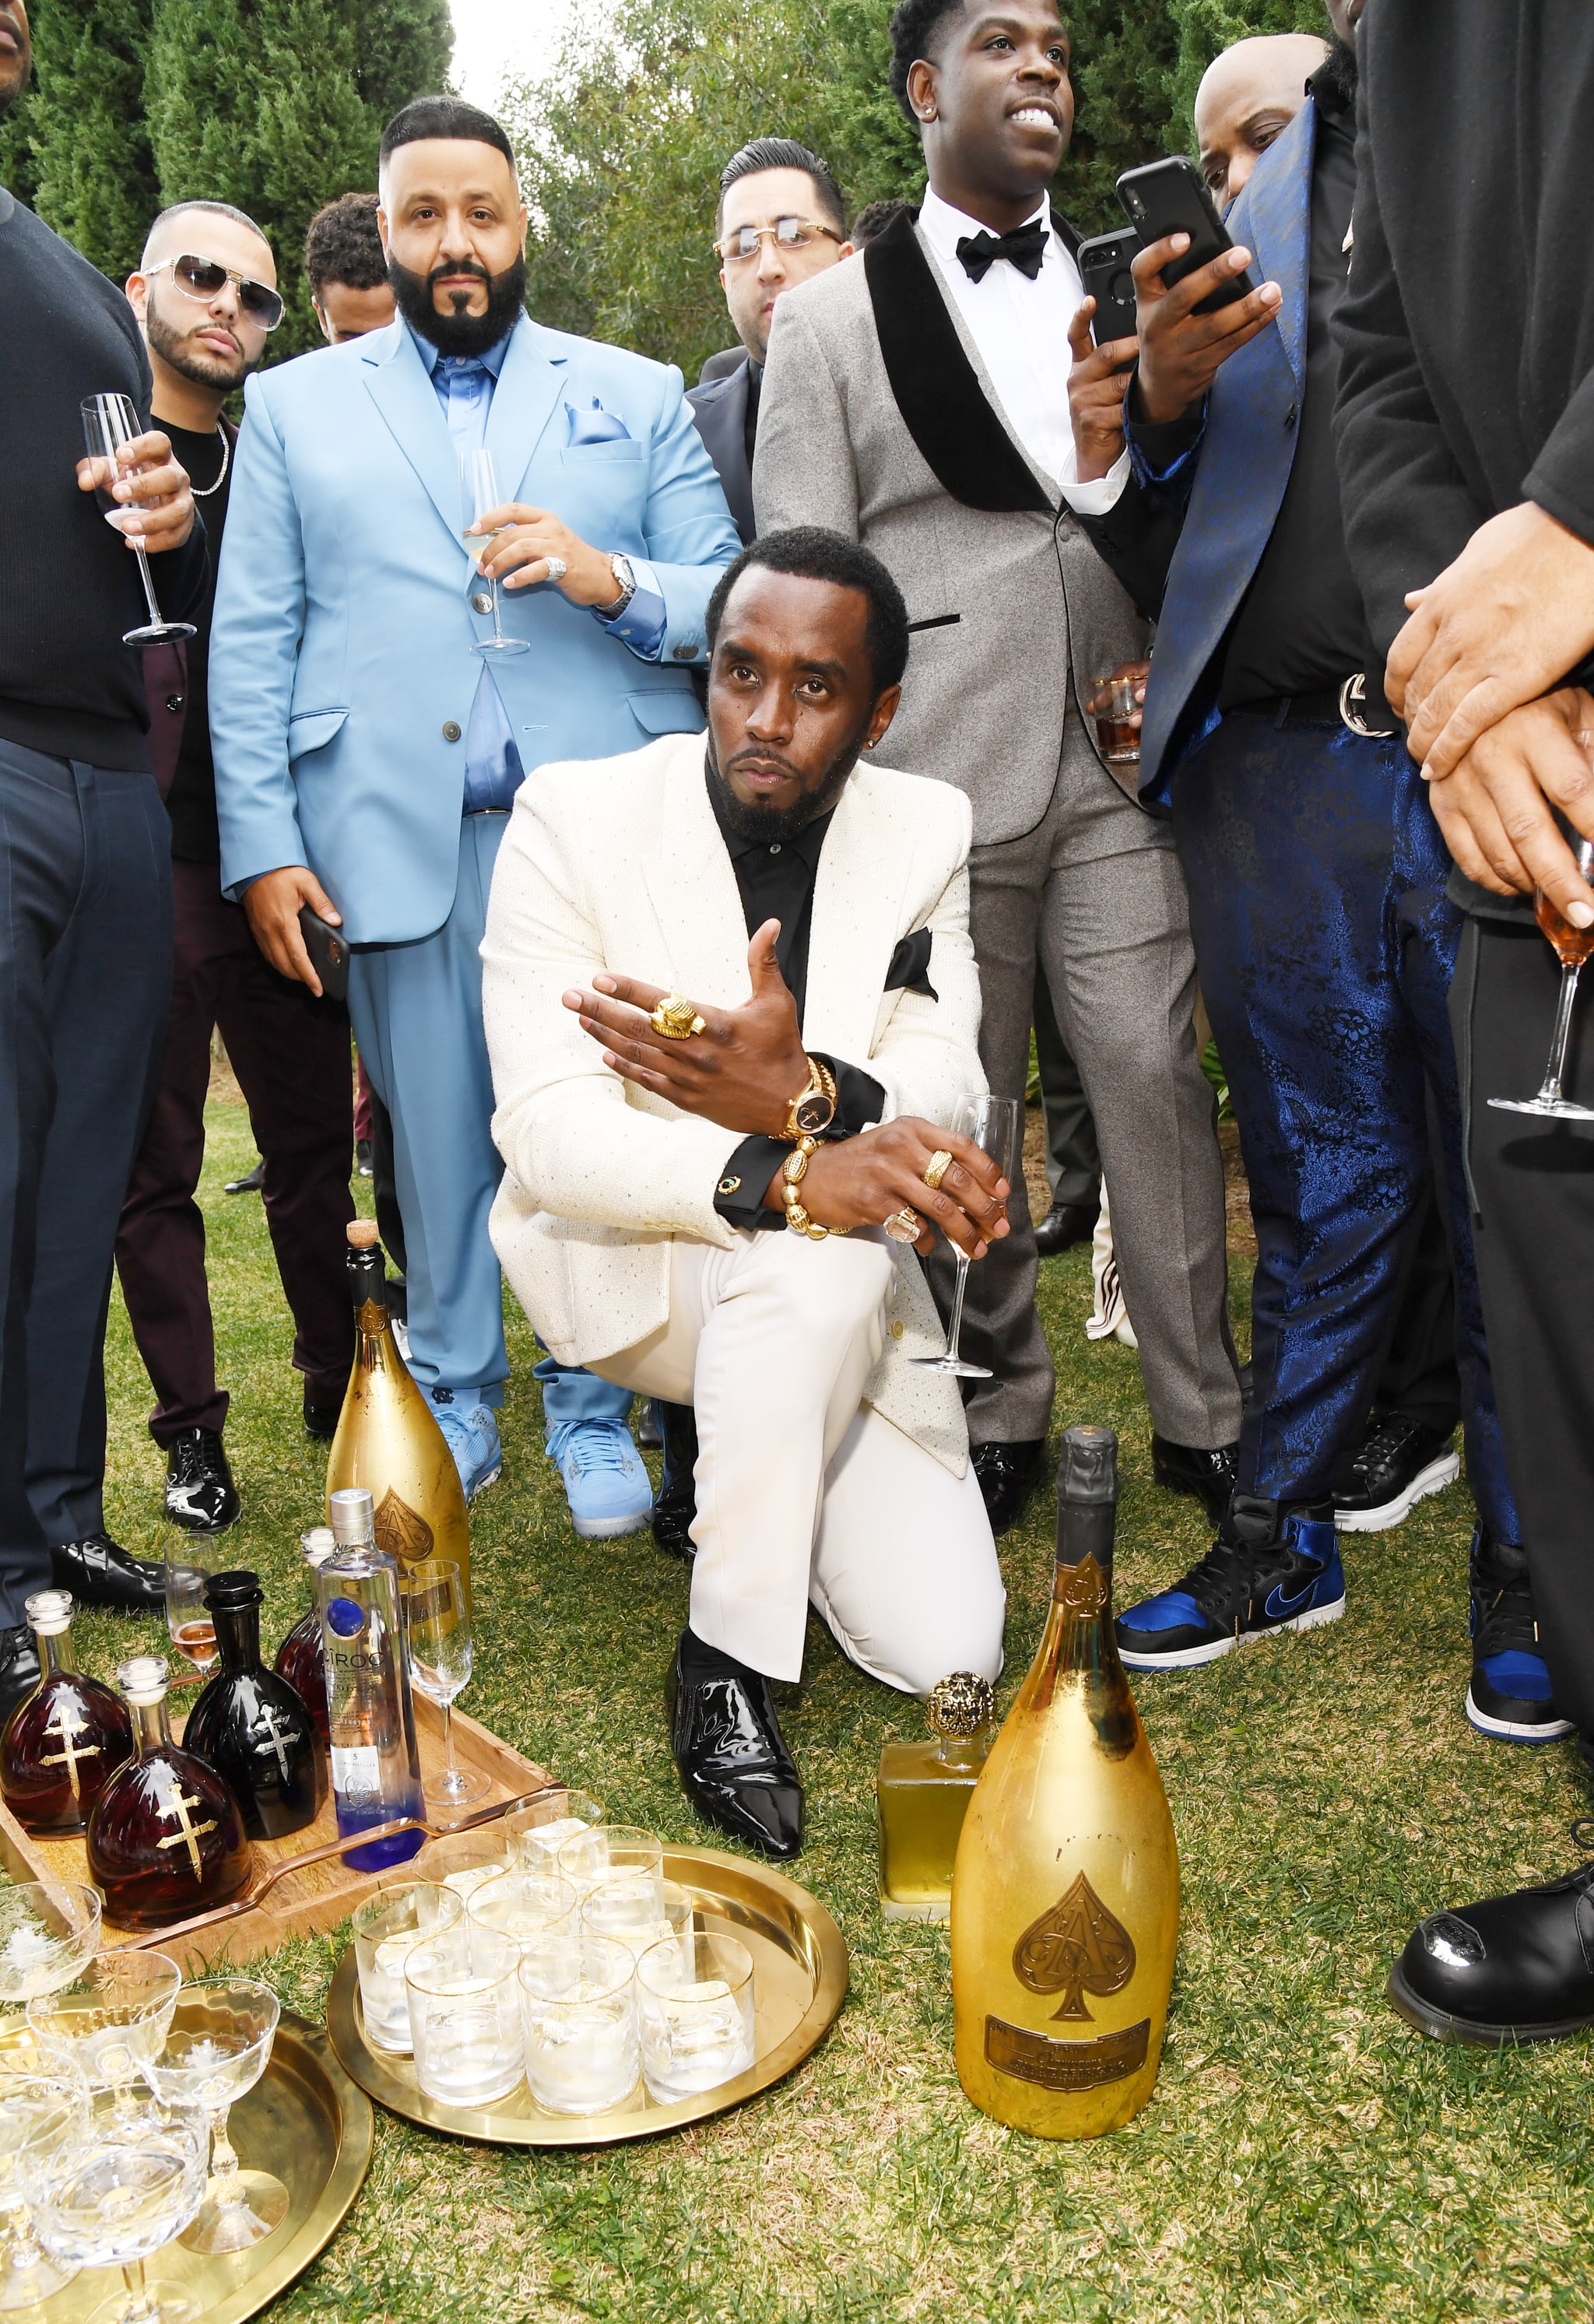 DJ Khaled, Diddy, and Guests at the 2020 Roc Nation Brunch in LA | Seeing  Stars! Beyoncé and JAY-Z's Roc Nation Brunch Brings Out Some of Music's  Finest | POPSUGAR Celebrity UK